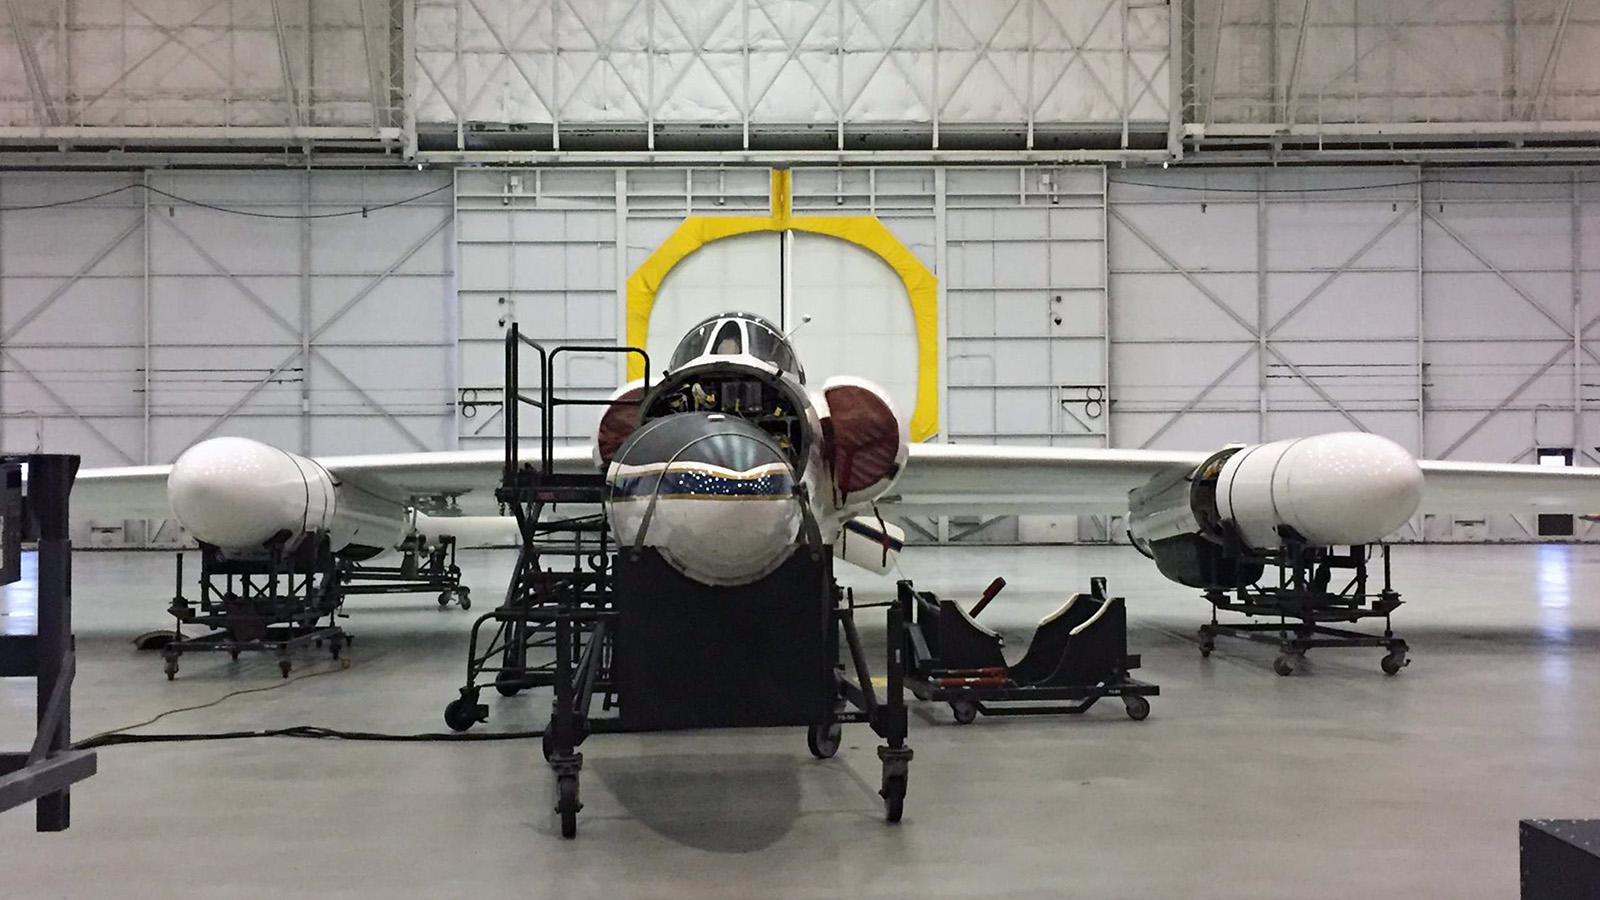 Winter Is Coming And This NASA Aircraft Will Help Study It